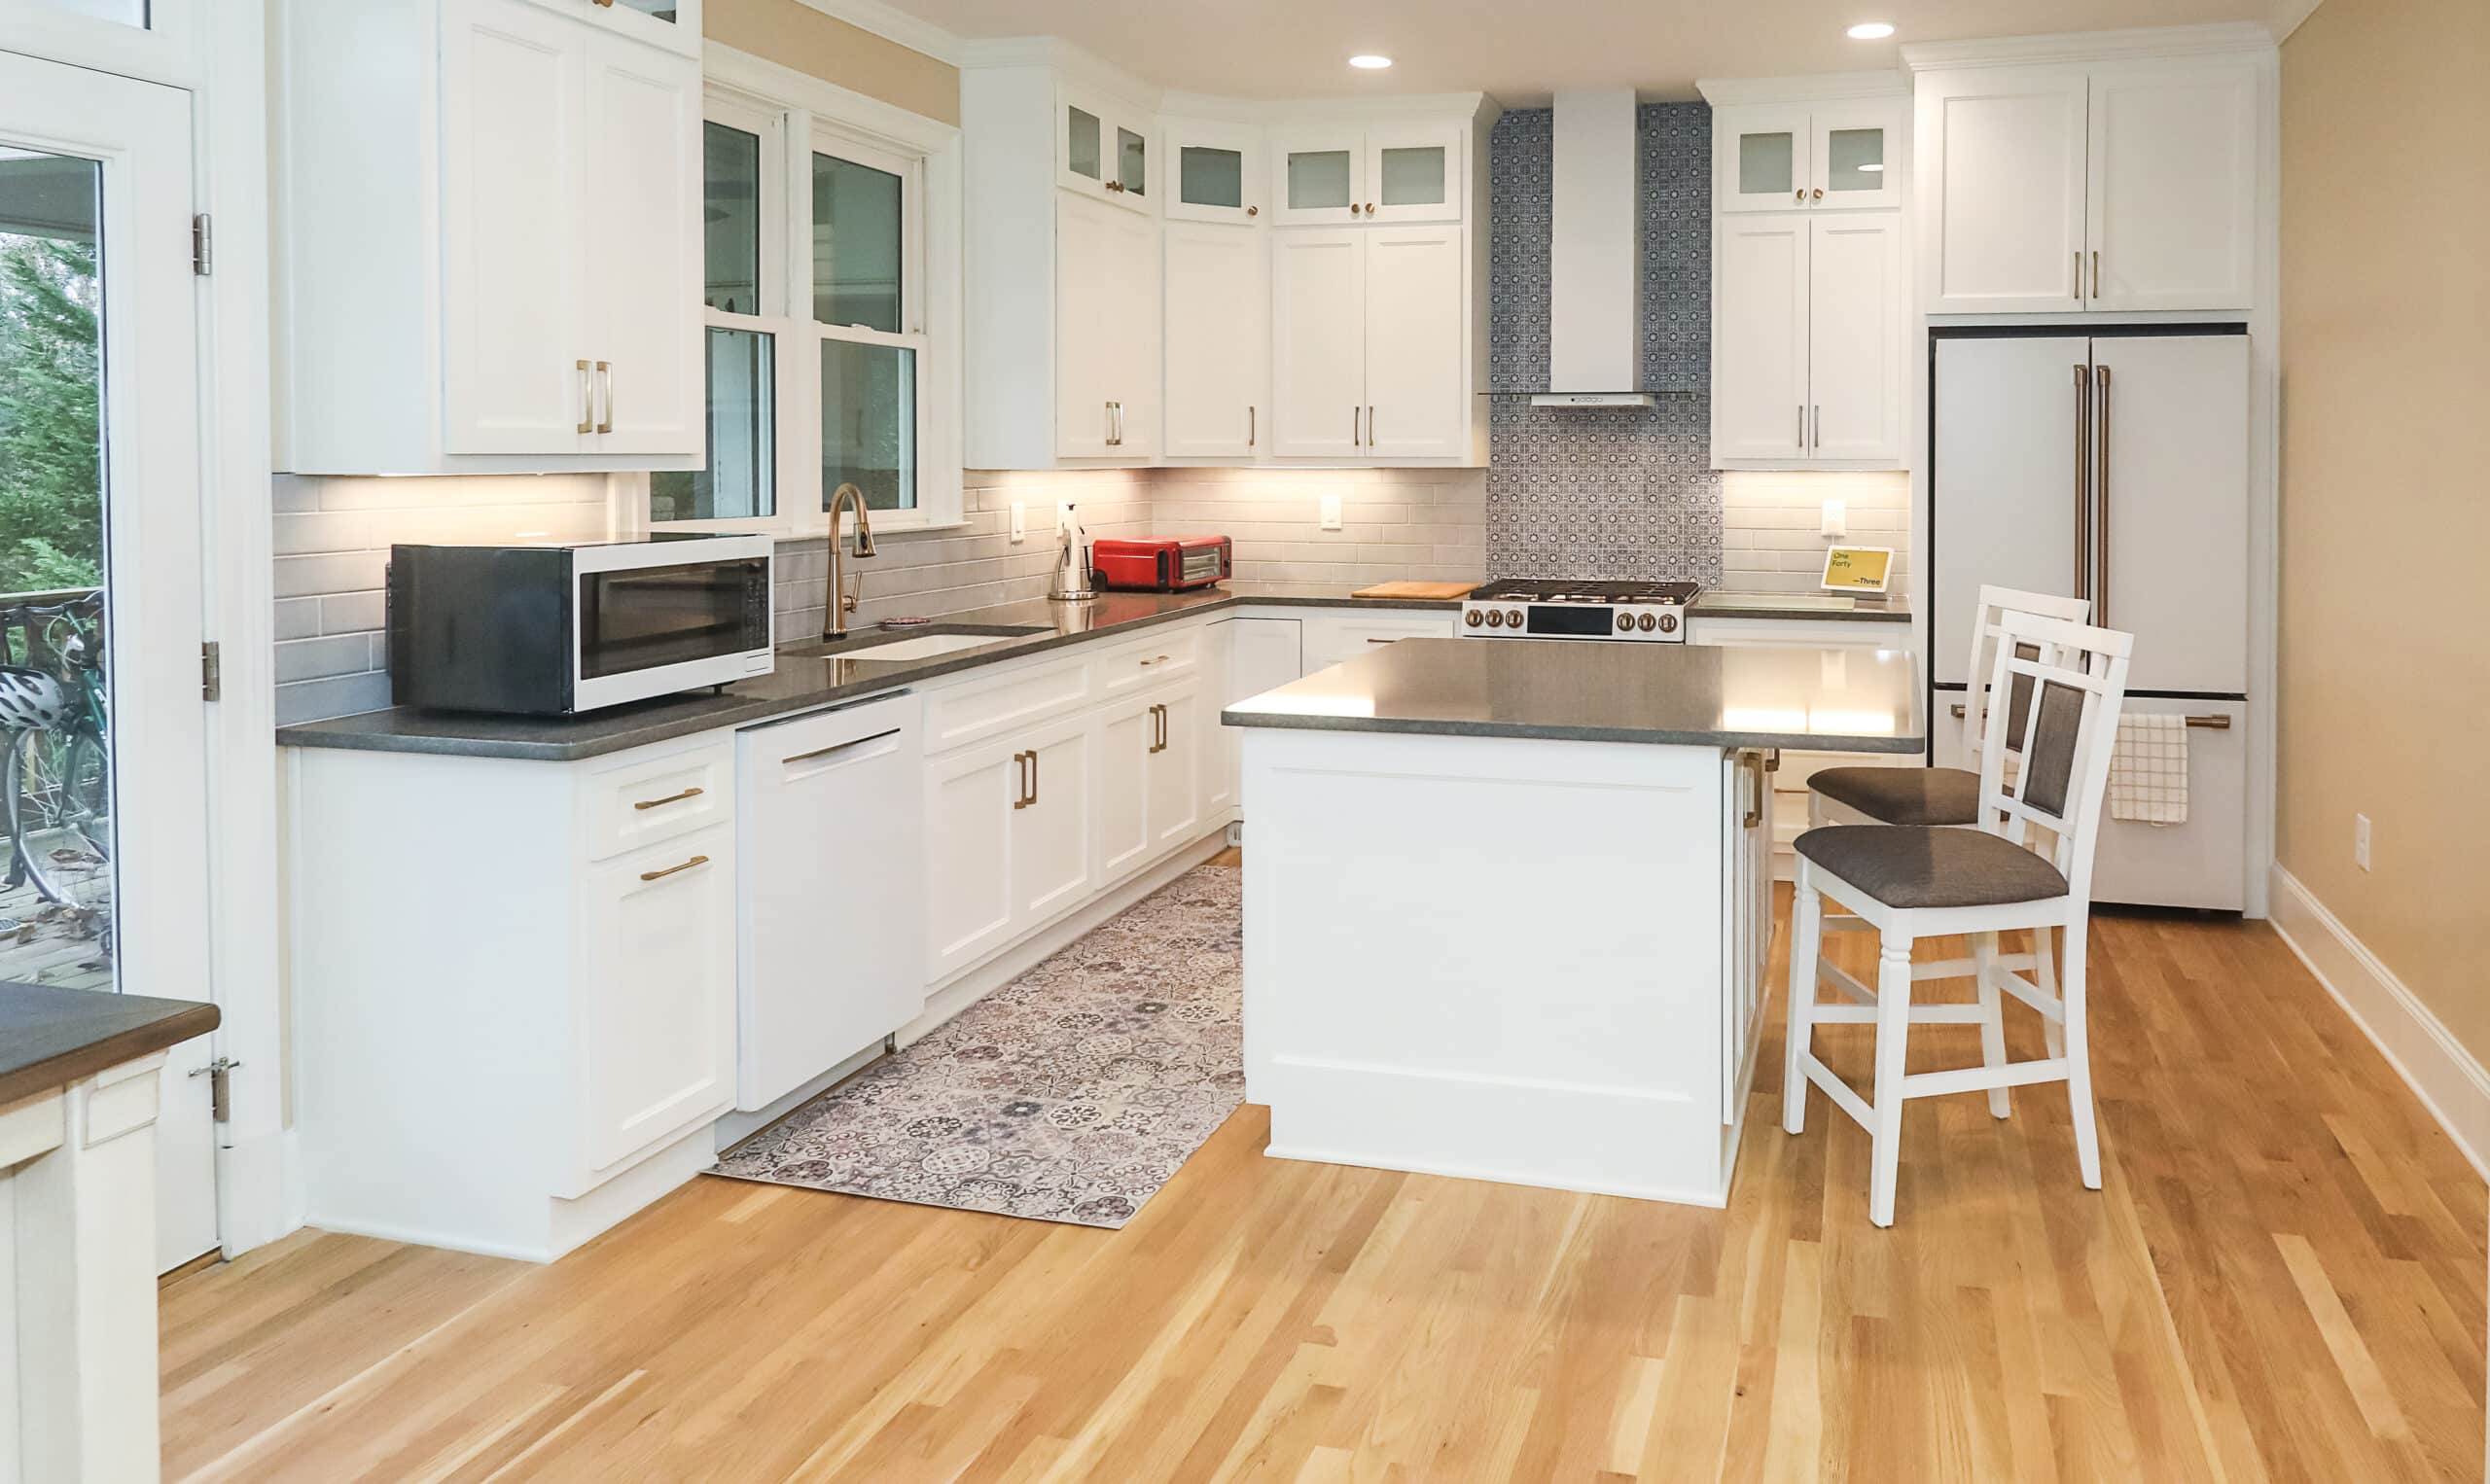 Explore our blog featuring modern kitchen interior designs that showcase white cabinetry, stainless steel appliances, and a central island with seating.